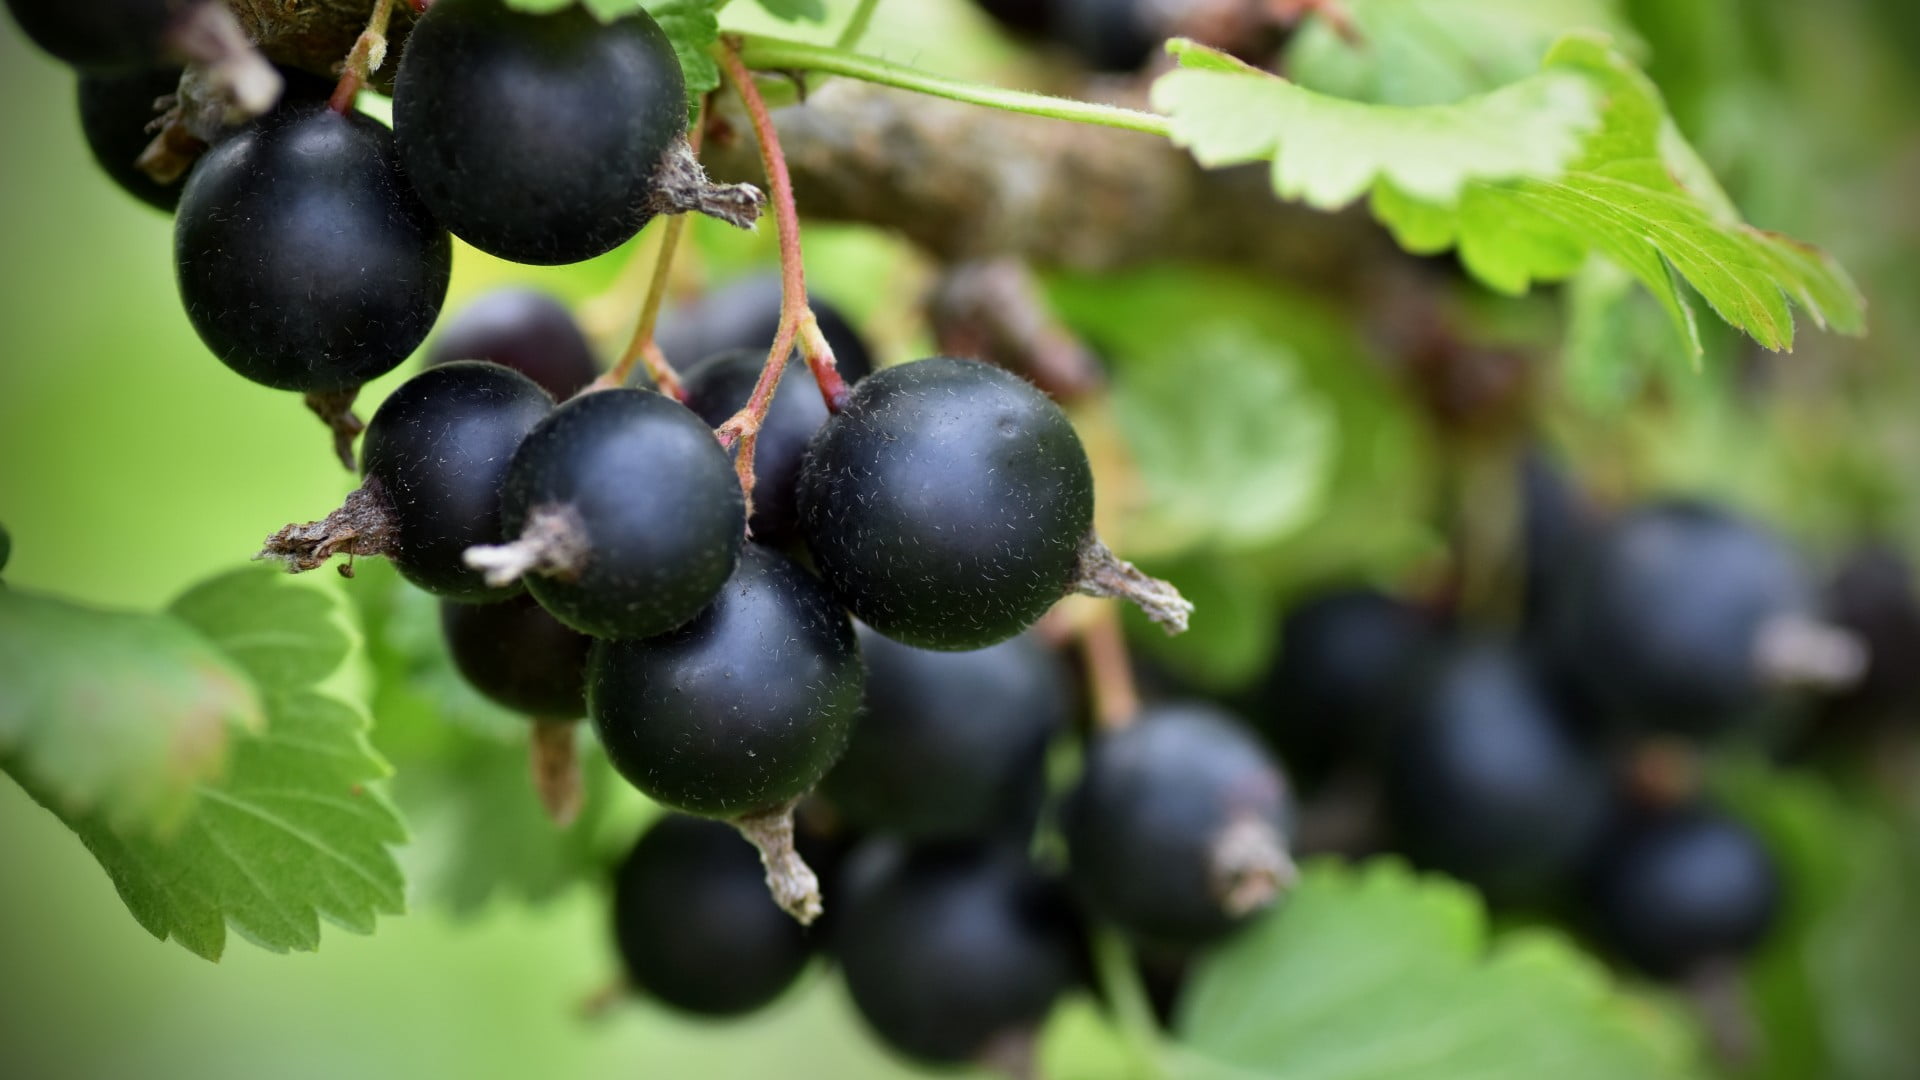 An image of a cluster of blackcurrants on a leafy tree. Photo: Shutterstock